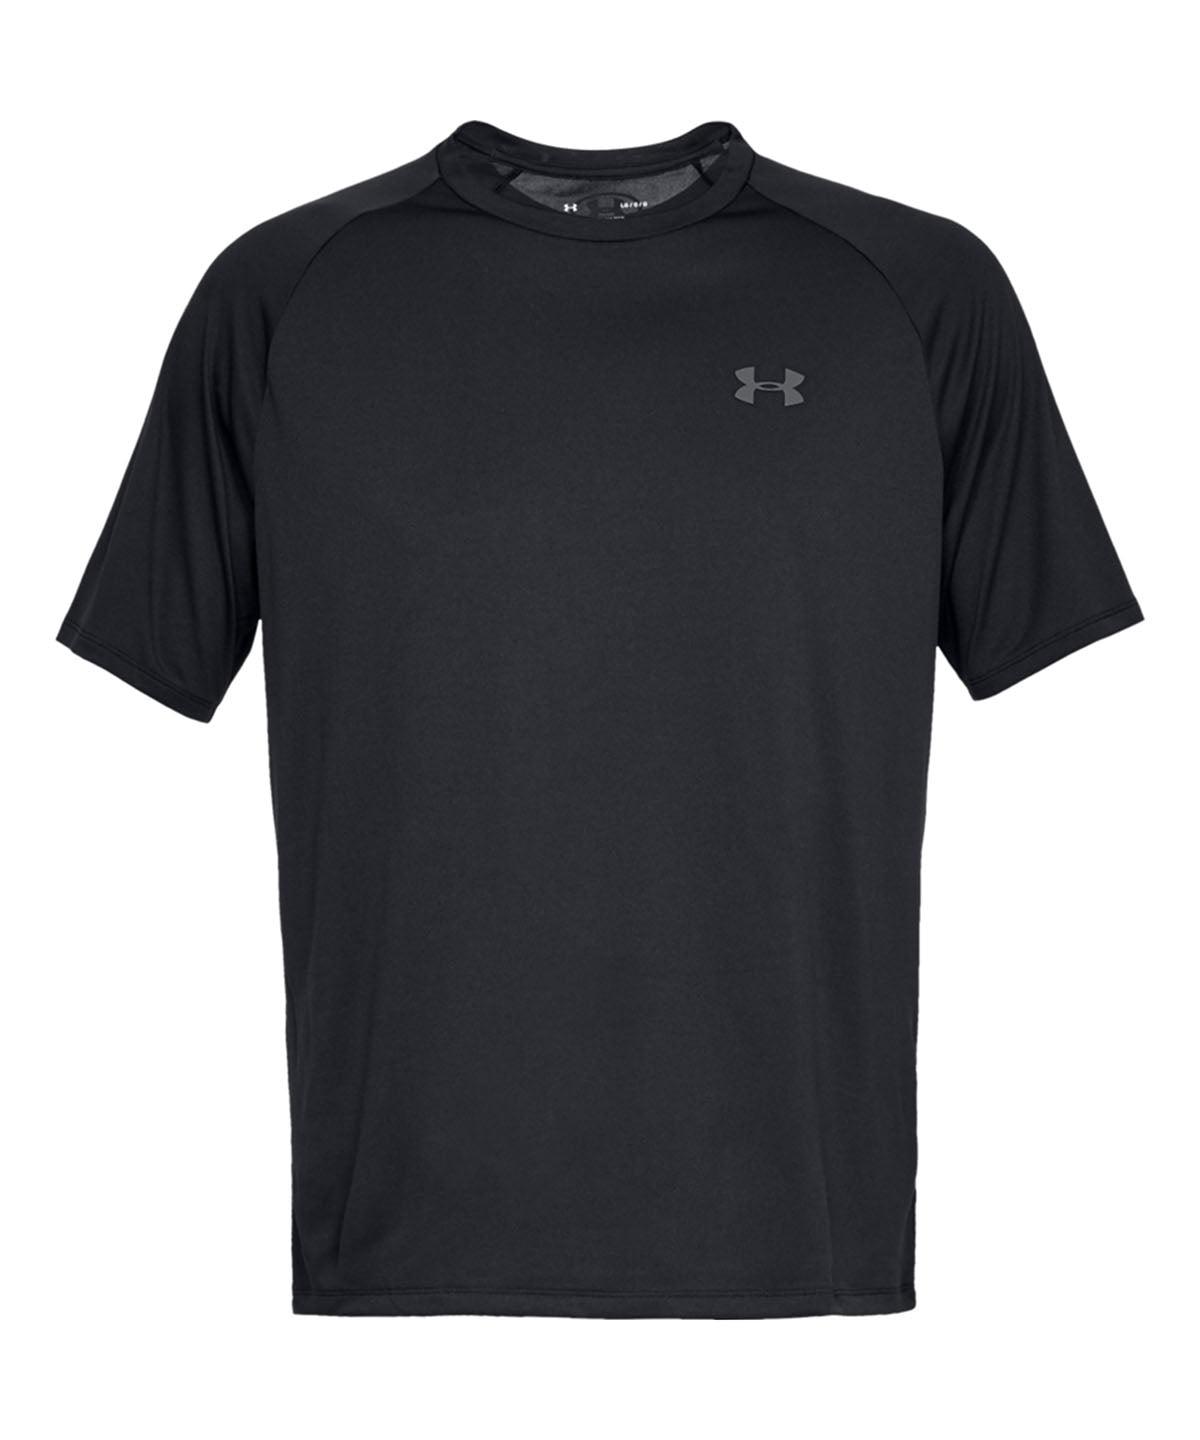 Black/Graphite - Tech™ short sleeve T-Shirts Under Armour Activewear & Performance, Back to the Gym, Exclusives, Gymwear, Must Haves, New Sizes for 2021, Plus Sizes, Premium, Premium Sports, Sports & Leisure, T-Shirts & Vests Schoolwear Centres